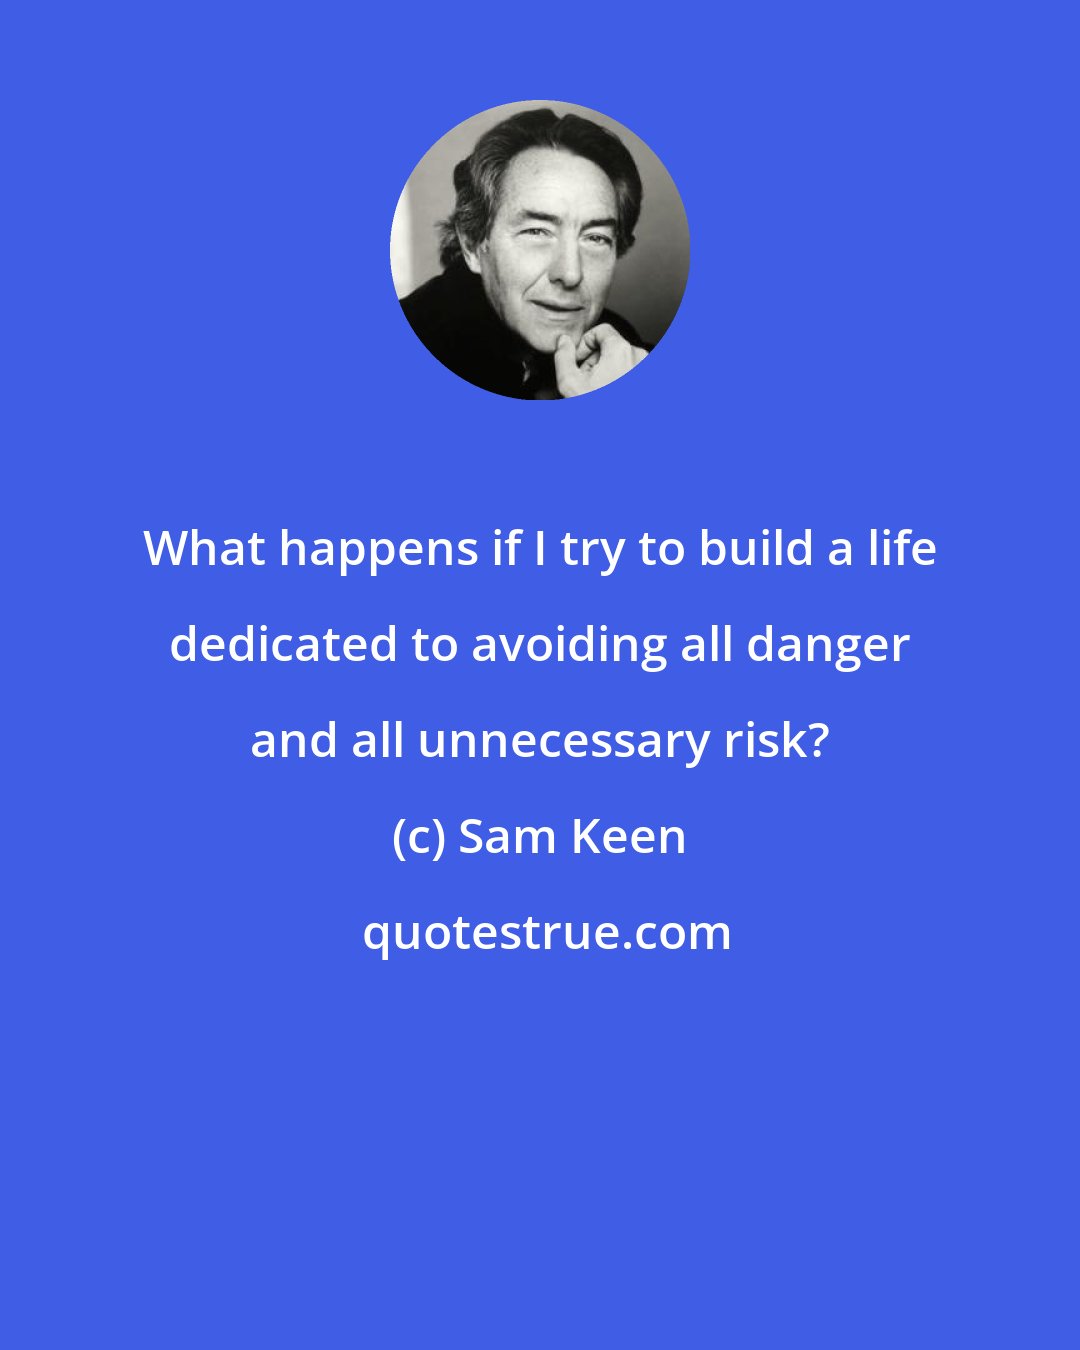 Sam Keen: What happens if I try to build a life dedicated to avoiding all danger and all unnecessary risk?